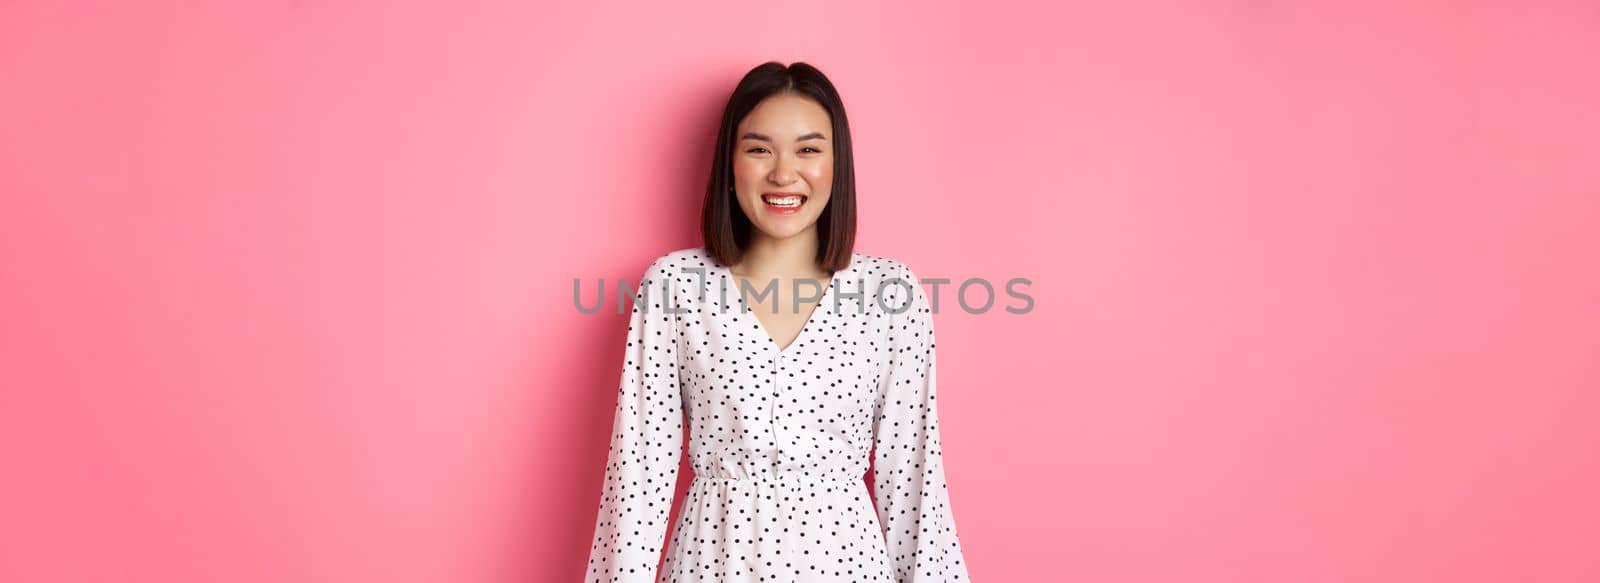 Happy korean woman in dress looking at camera, smiling and laughing with sincere expression, standing over pink background. Copy space